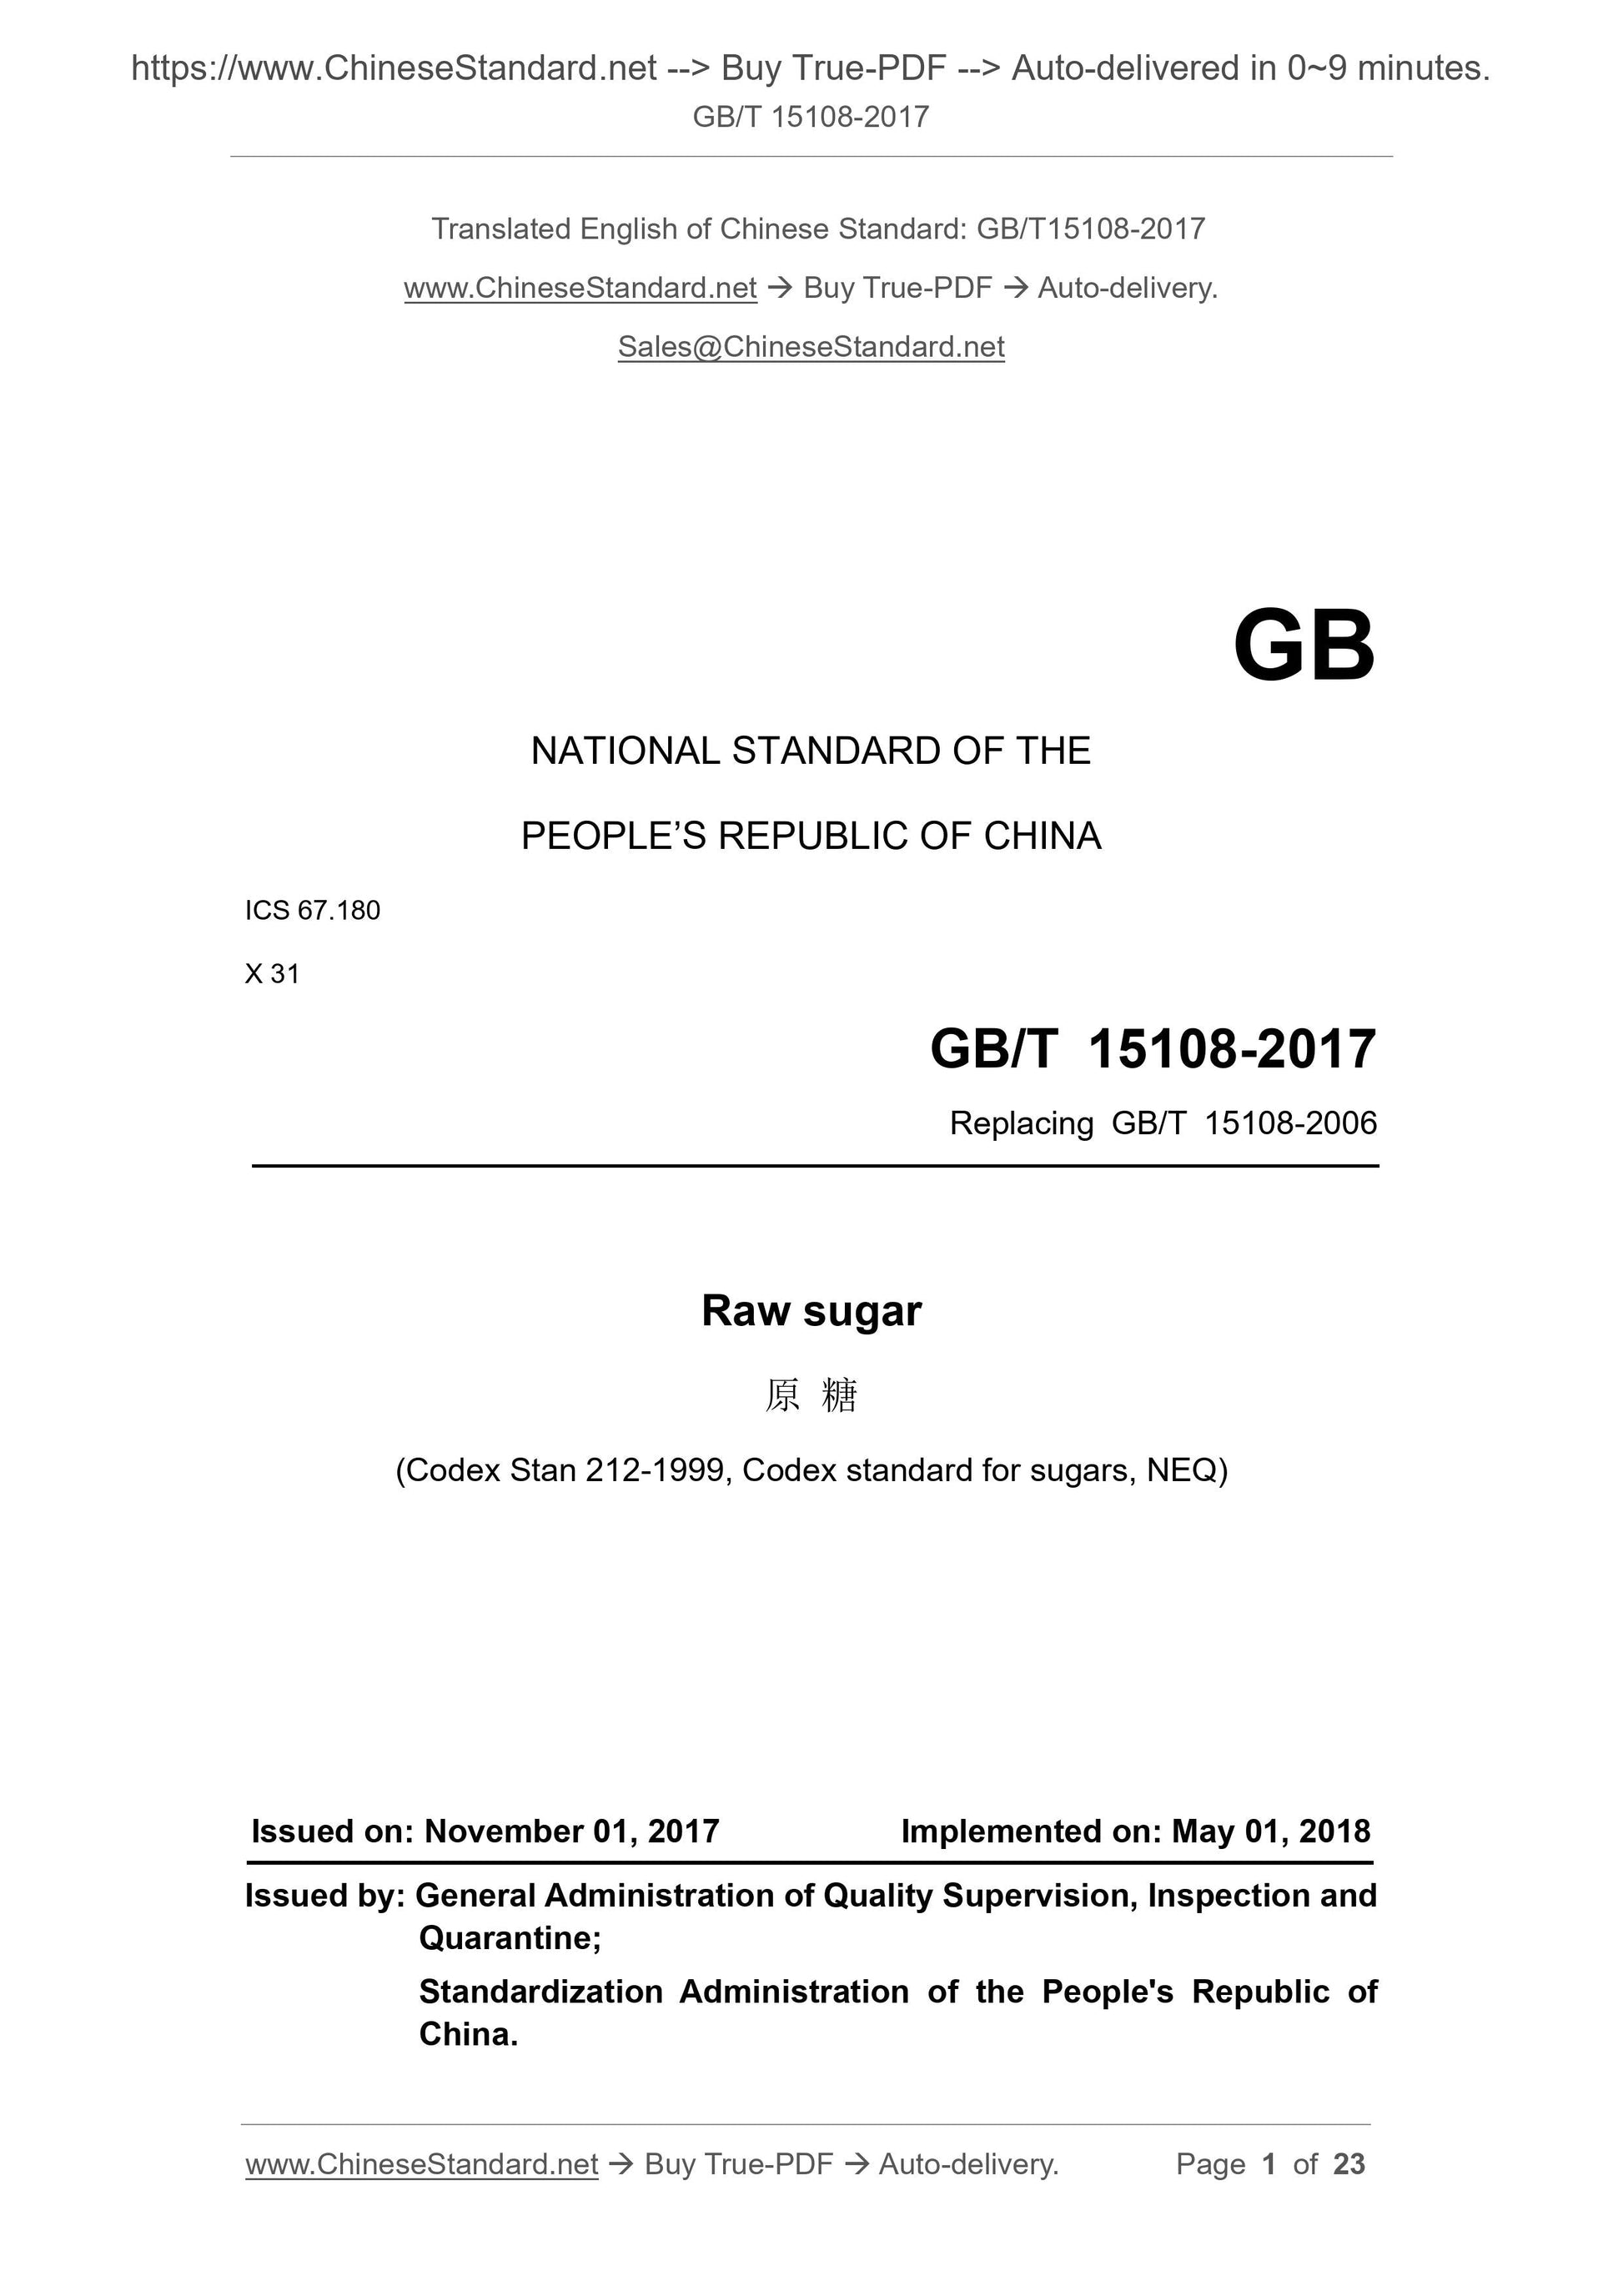 GB/T 15108-2017 Page 1